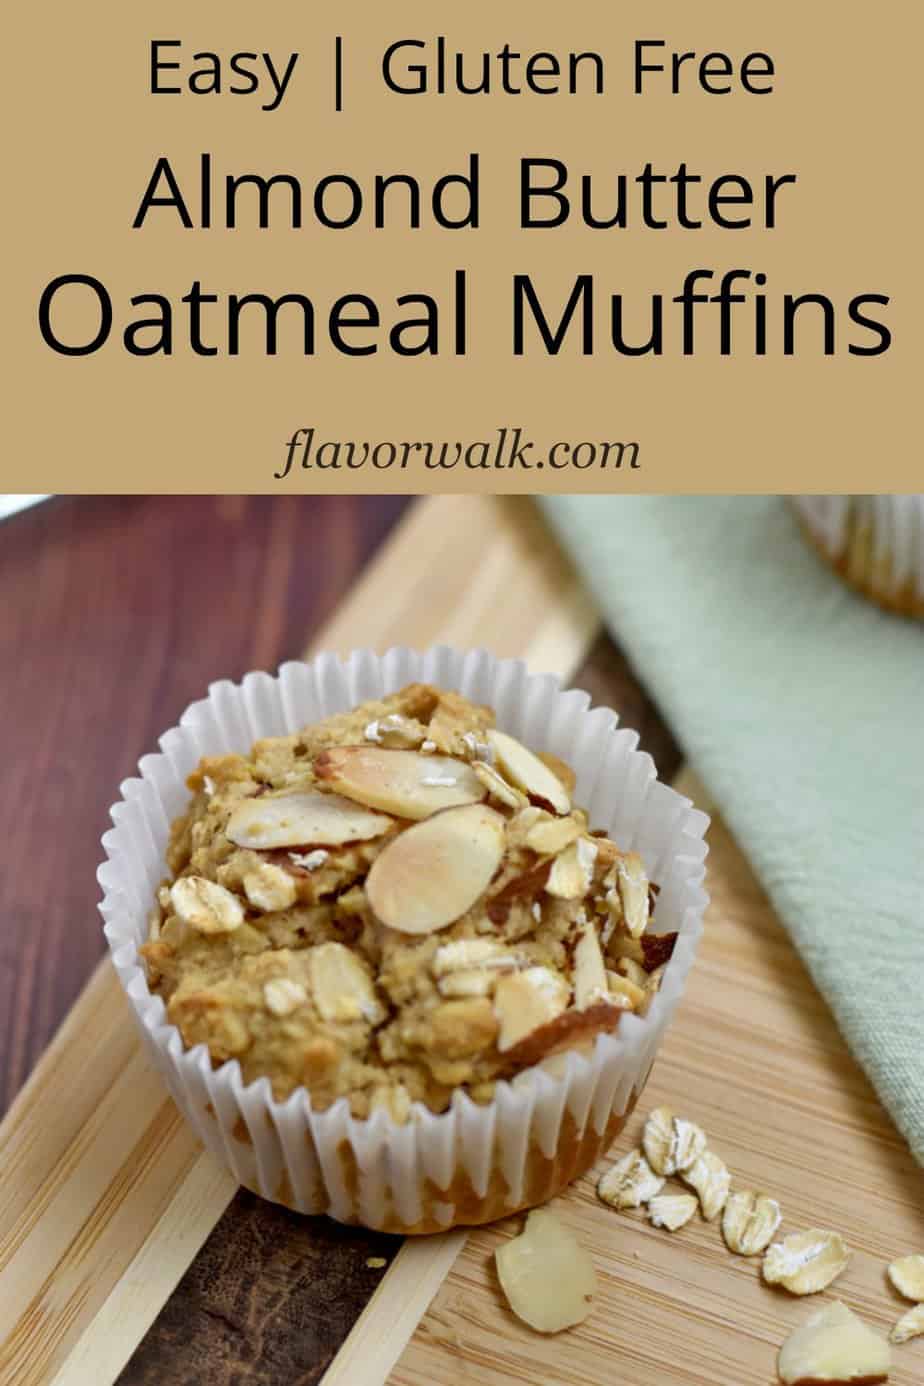 One gluten free oatmeal muffin on a wood cutting board with a tan text overlay at the top.